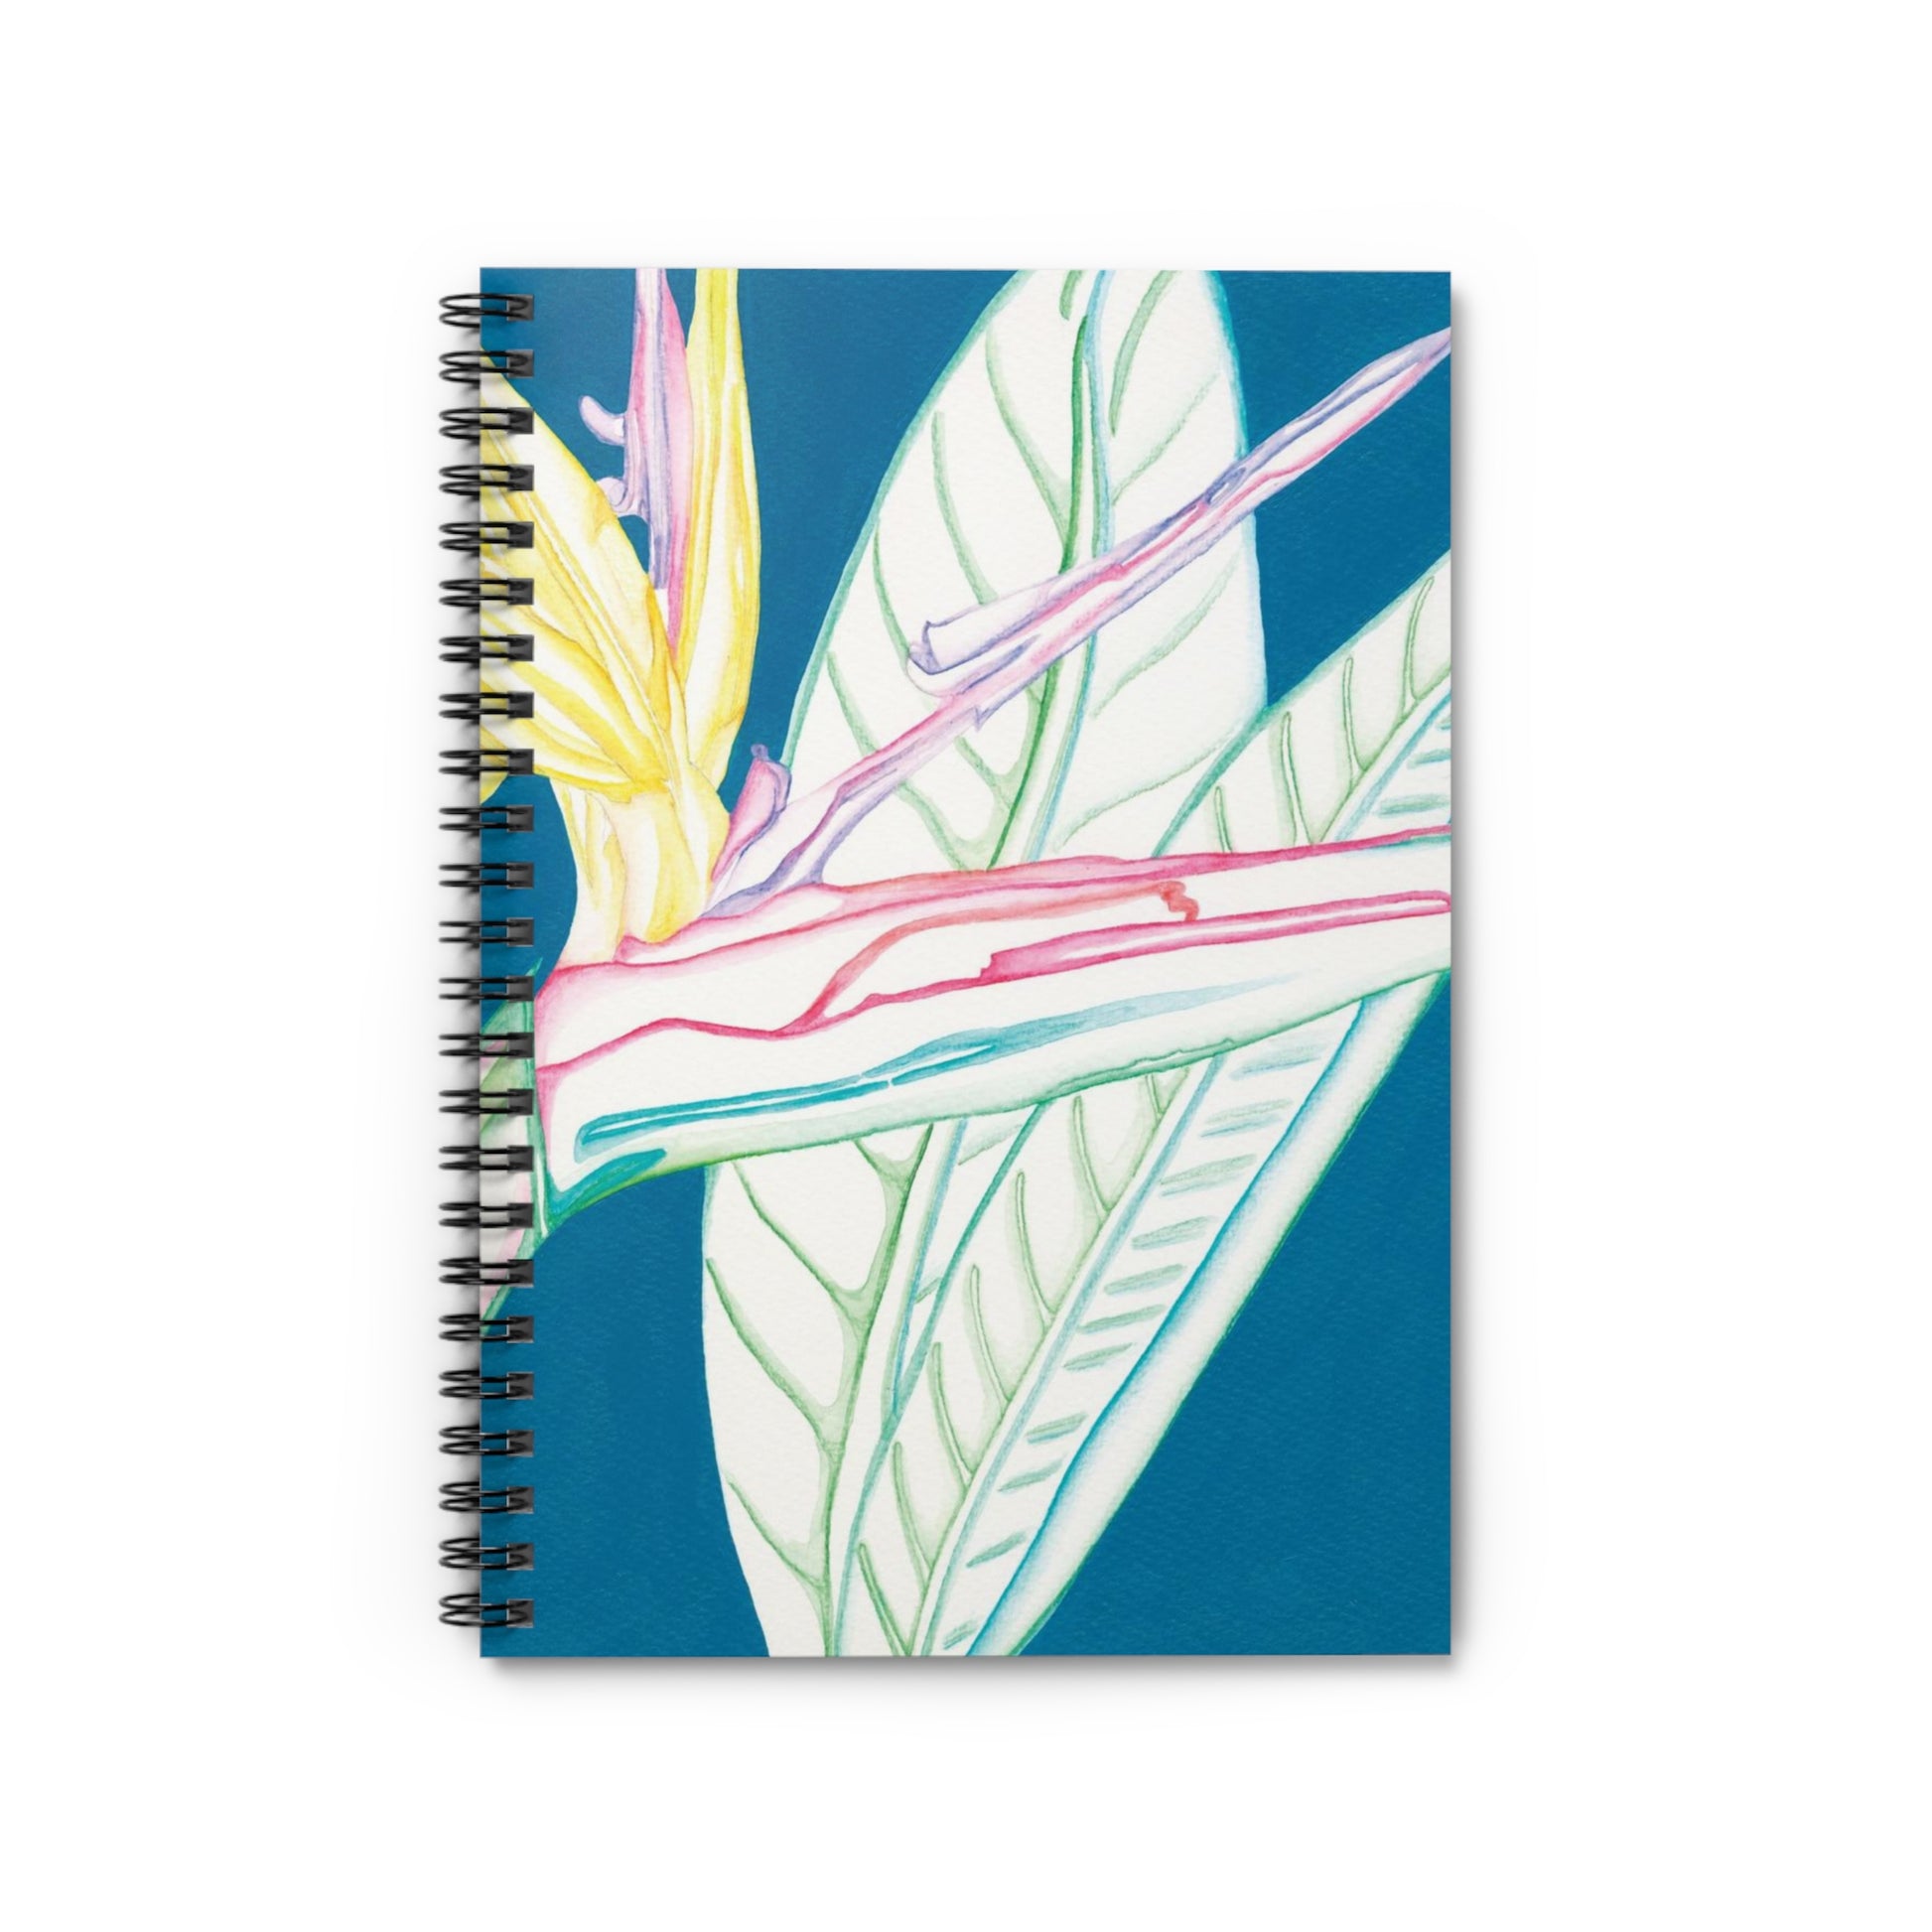 Cuaderno Reversible A5 Spiral Notebook Durable Hardcover Notebook No Lines  - Unique Designs & Illustrations by La Levina (80 sheets, 160 pages)